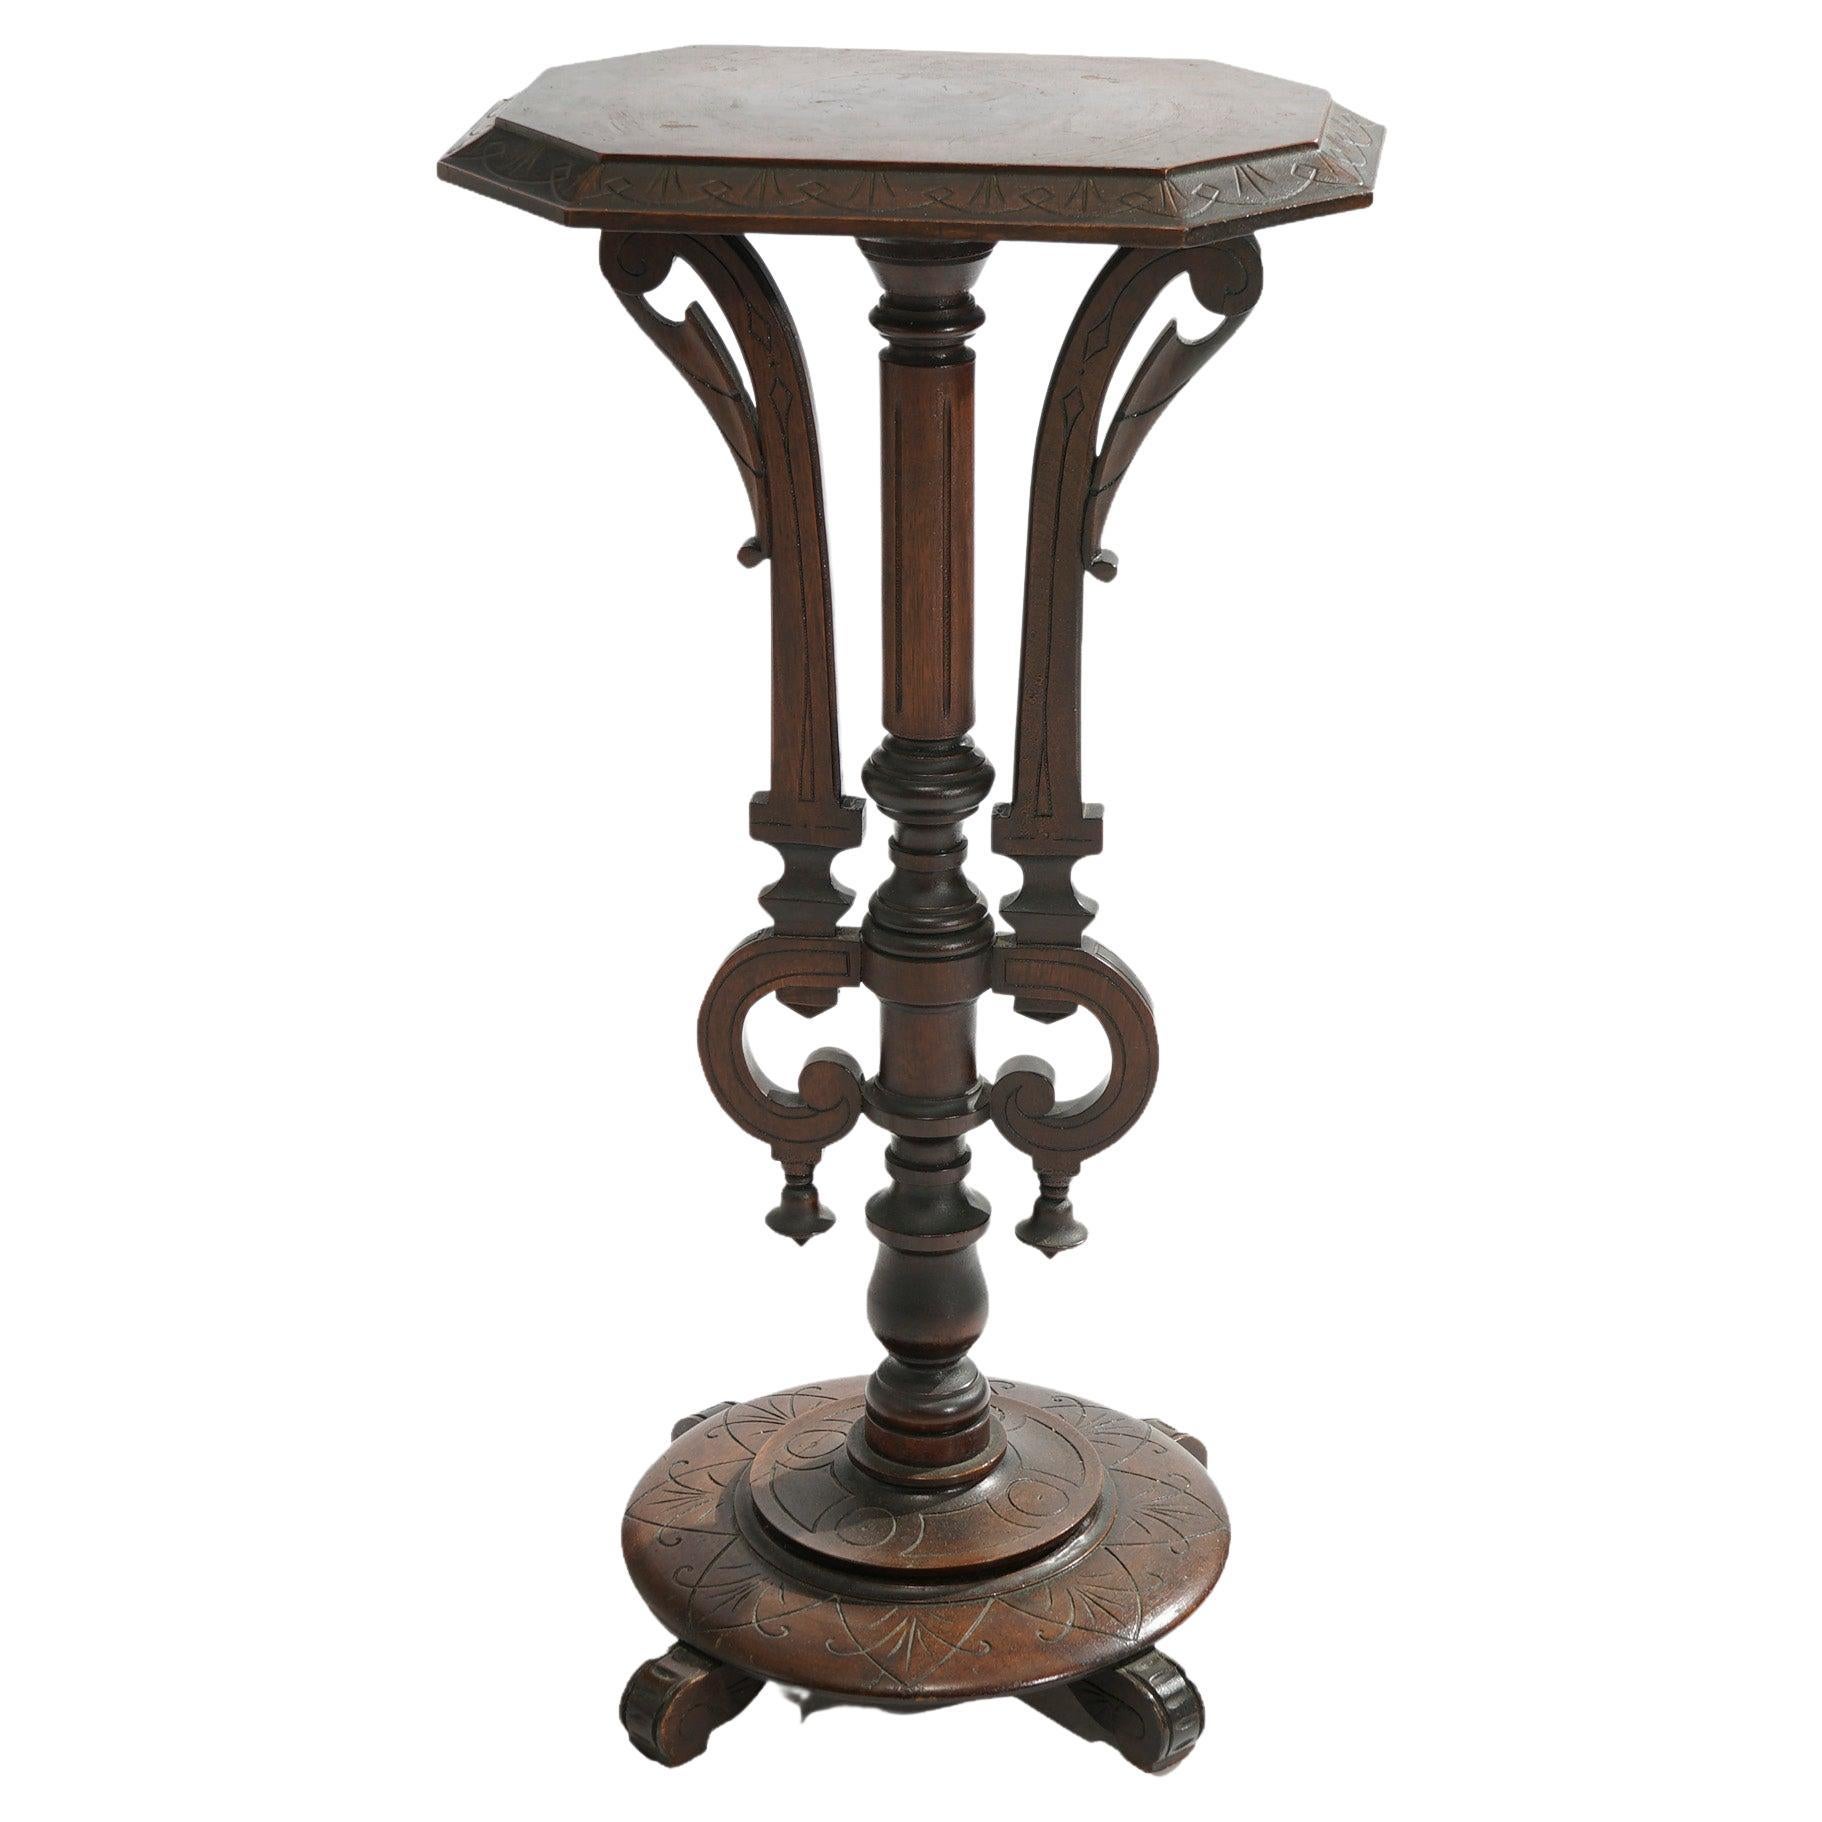 Antique Aesthetic Movement Carved Walnut Sculpture Display Pedestal Circa 1890 For Sale